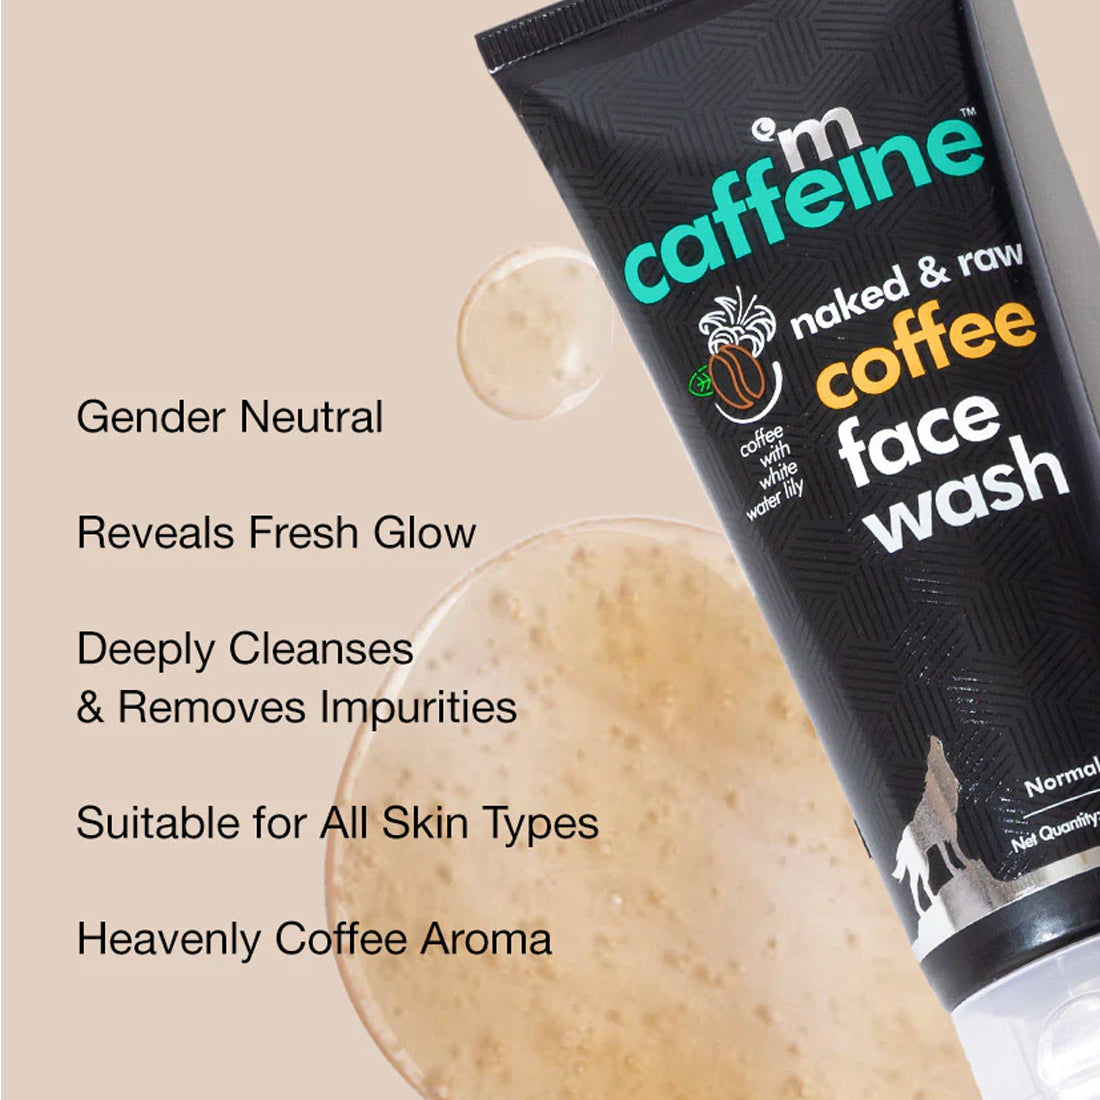 Coffee Face Wash to Remove Tan & Deeply Cleanse - 75 ml - Natural & 100% Vegan